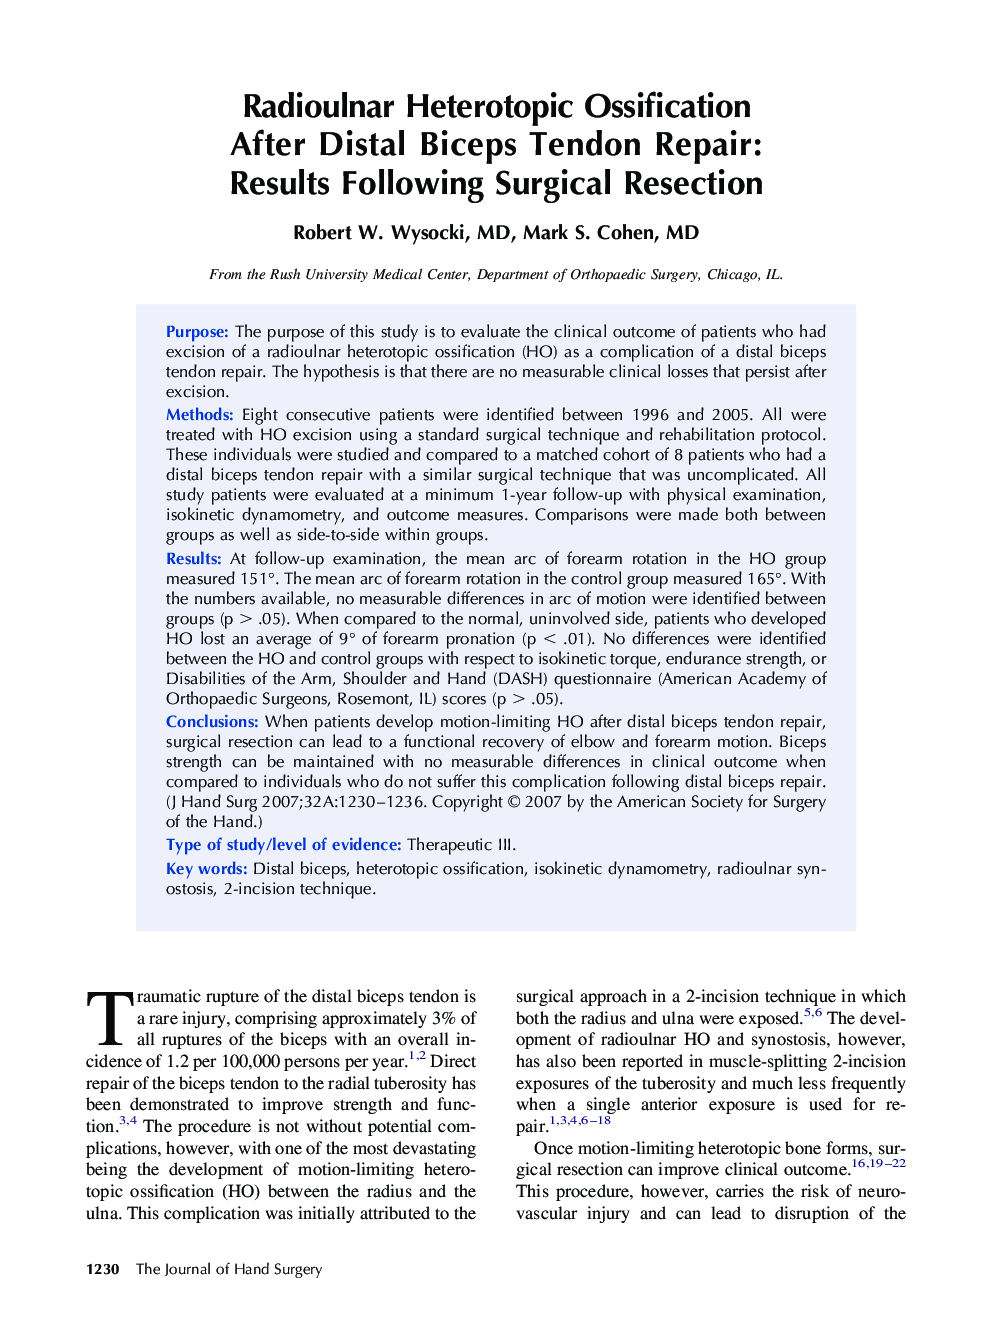 Radioulnar Heterotopic Ossification After Distal Biceps Tendon Repair: Results Following Surgical Resection 